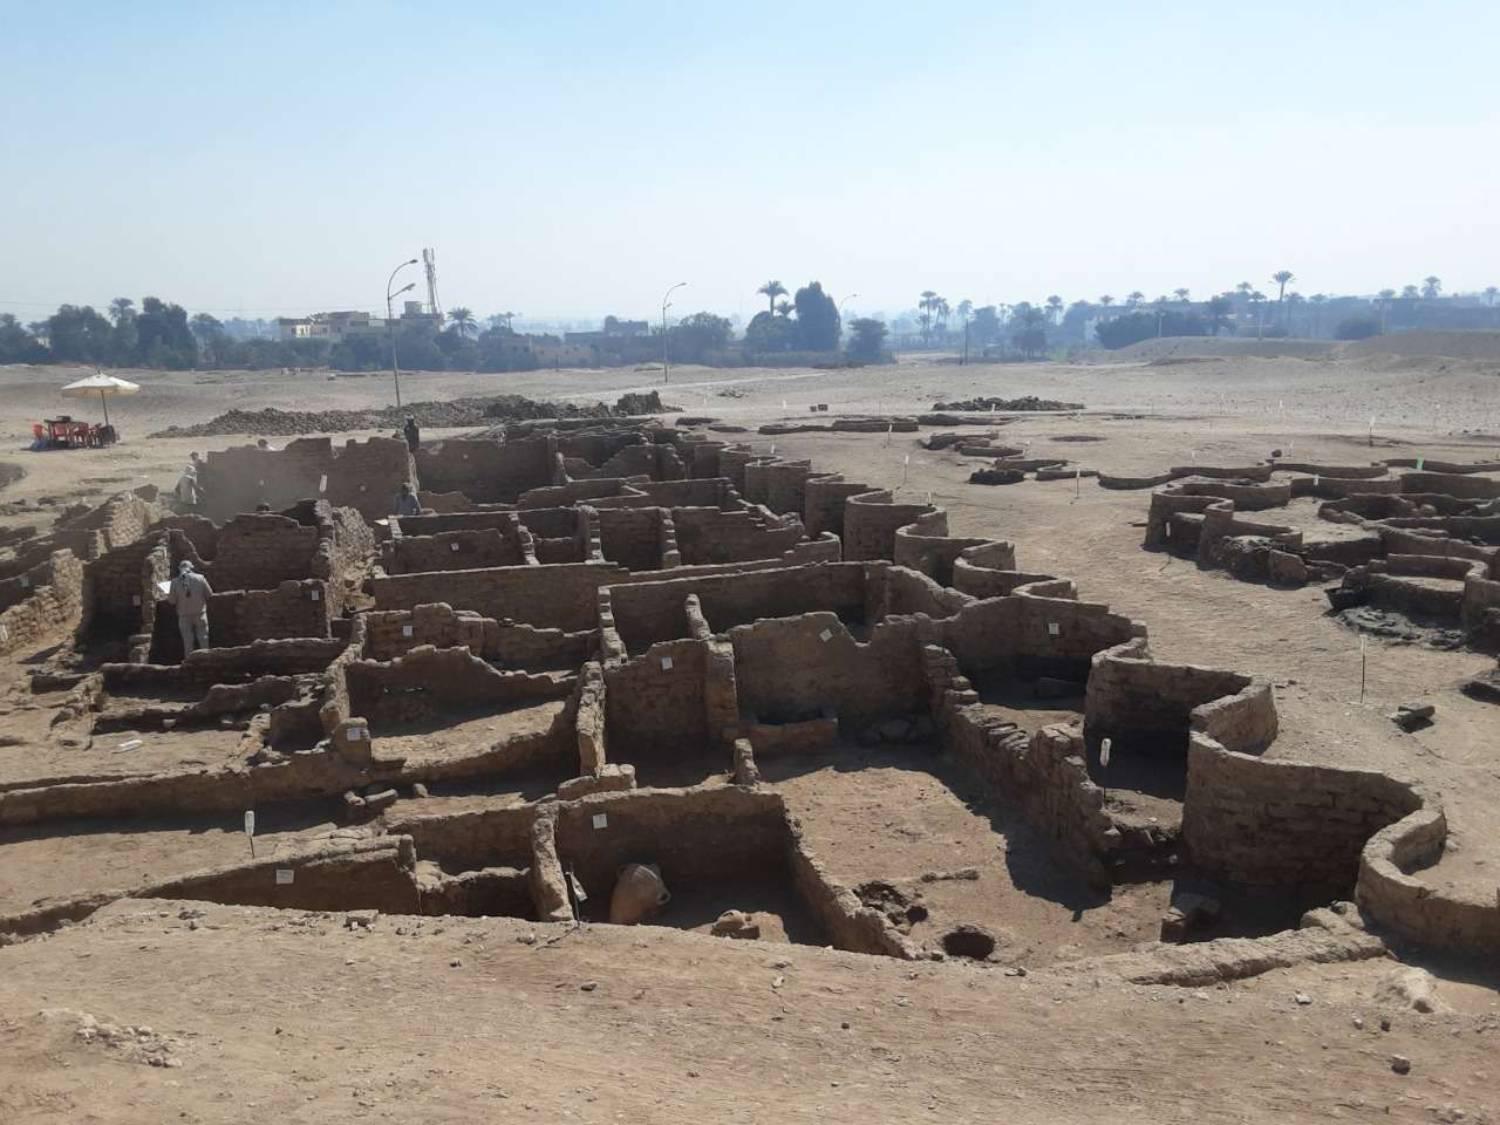 Part of the 'Lost Golden City' in Luxor, Egypt